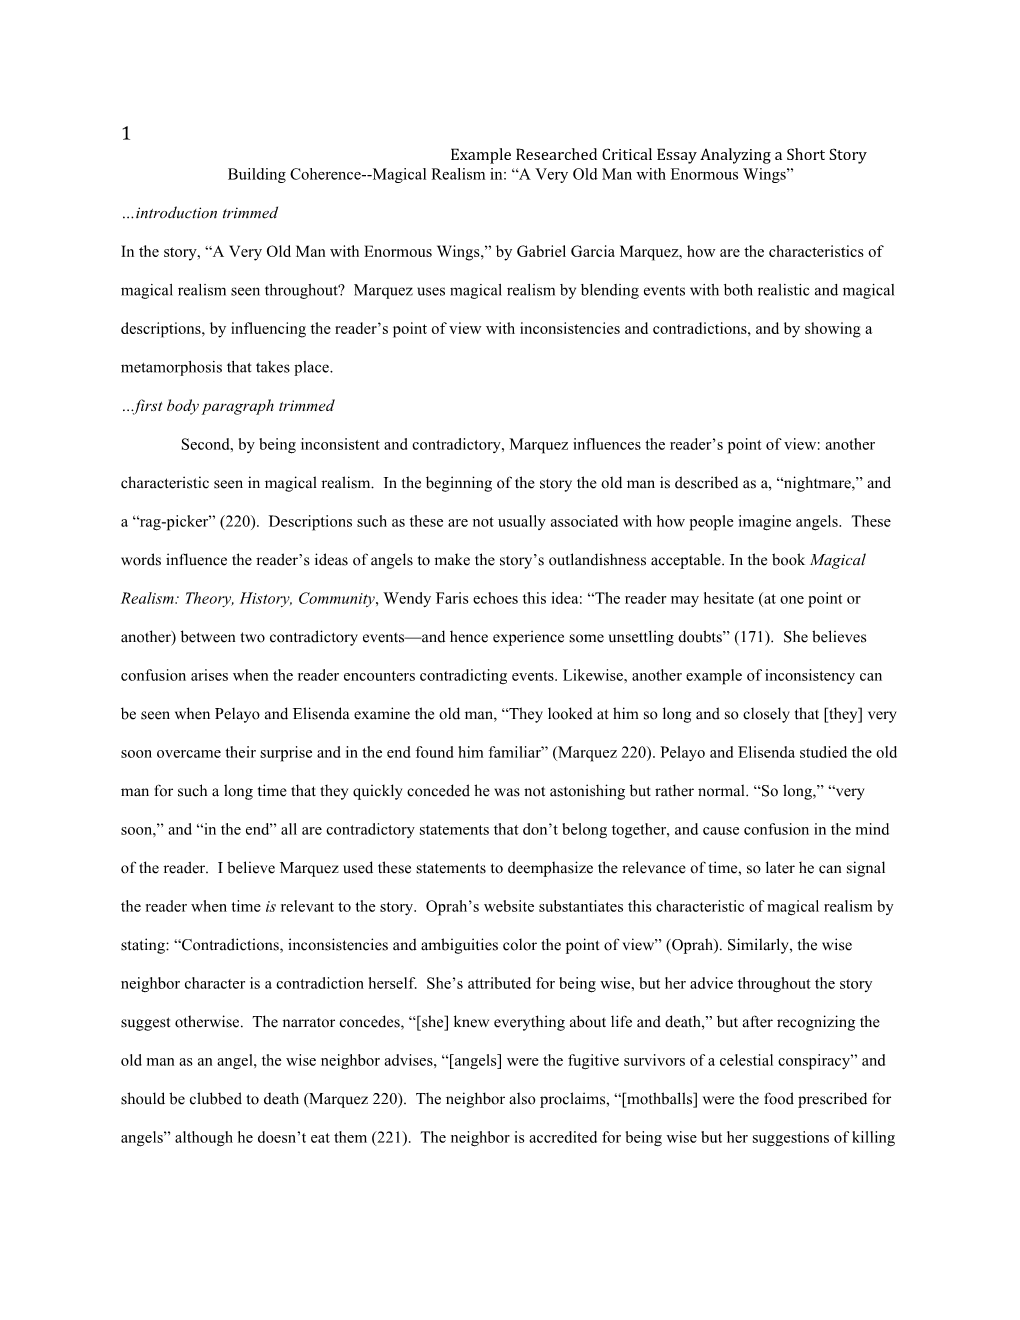 Example Researched Critical Essay Analyzing a Short Story